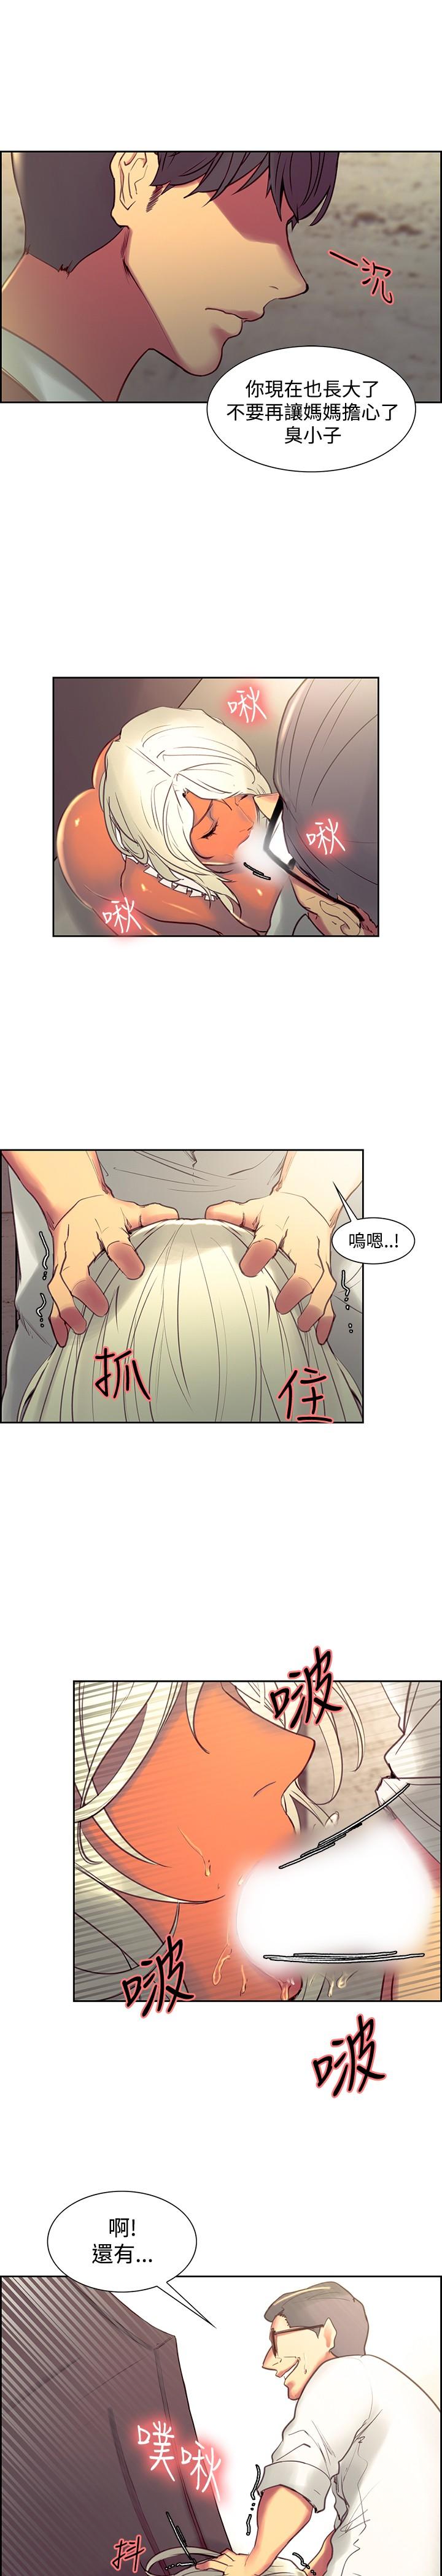 [Serious] Domesticate the Housekeeper 调教家政妇 Ch.29~44END [Chinese]中文 64